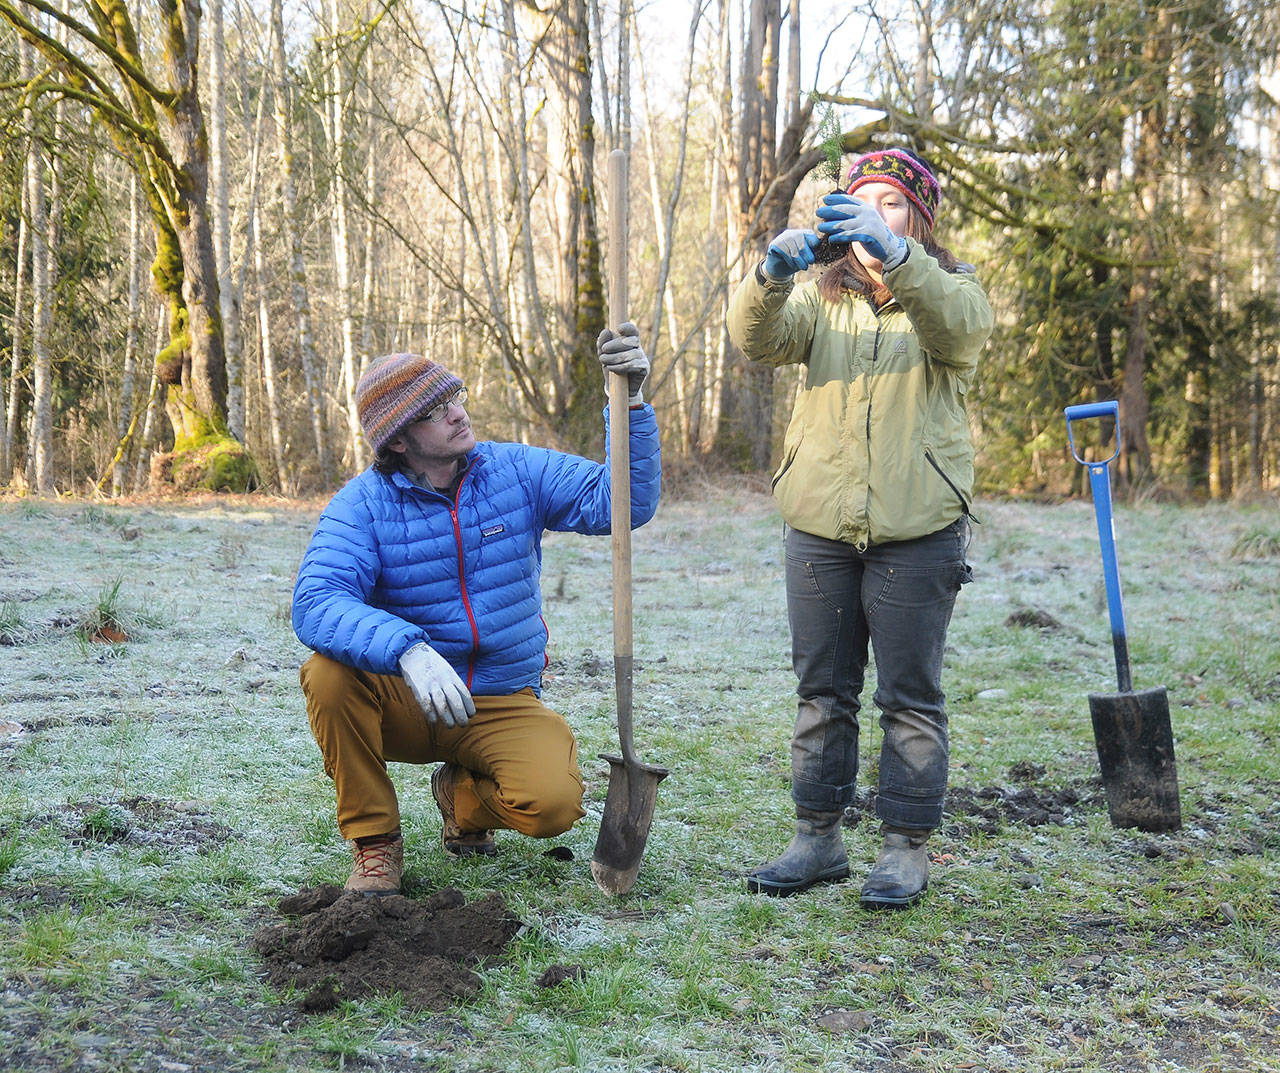 Stewardship coordinator Nate Roberts and education/outreach associate Rian Plastow of the North Olympic Salmon Coalition lead a tree planting event near the Dungeness River in pre-pandemic February 2020. (Michael Dashiell/Olympic Peninsula News Group file photo)